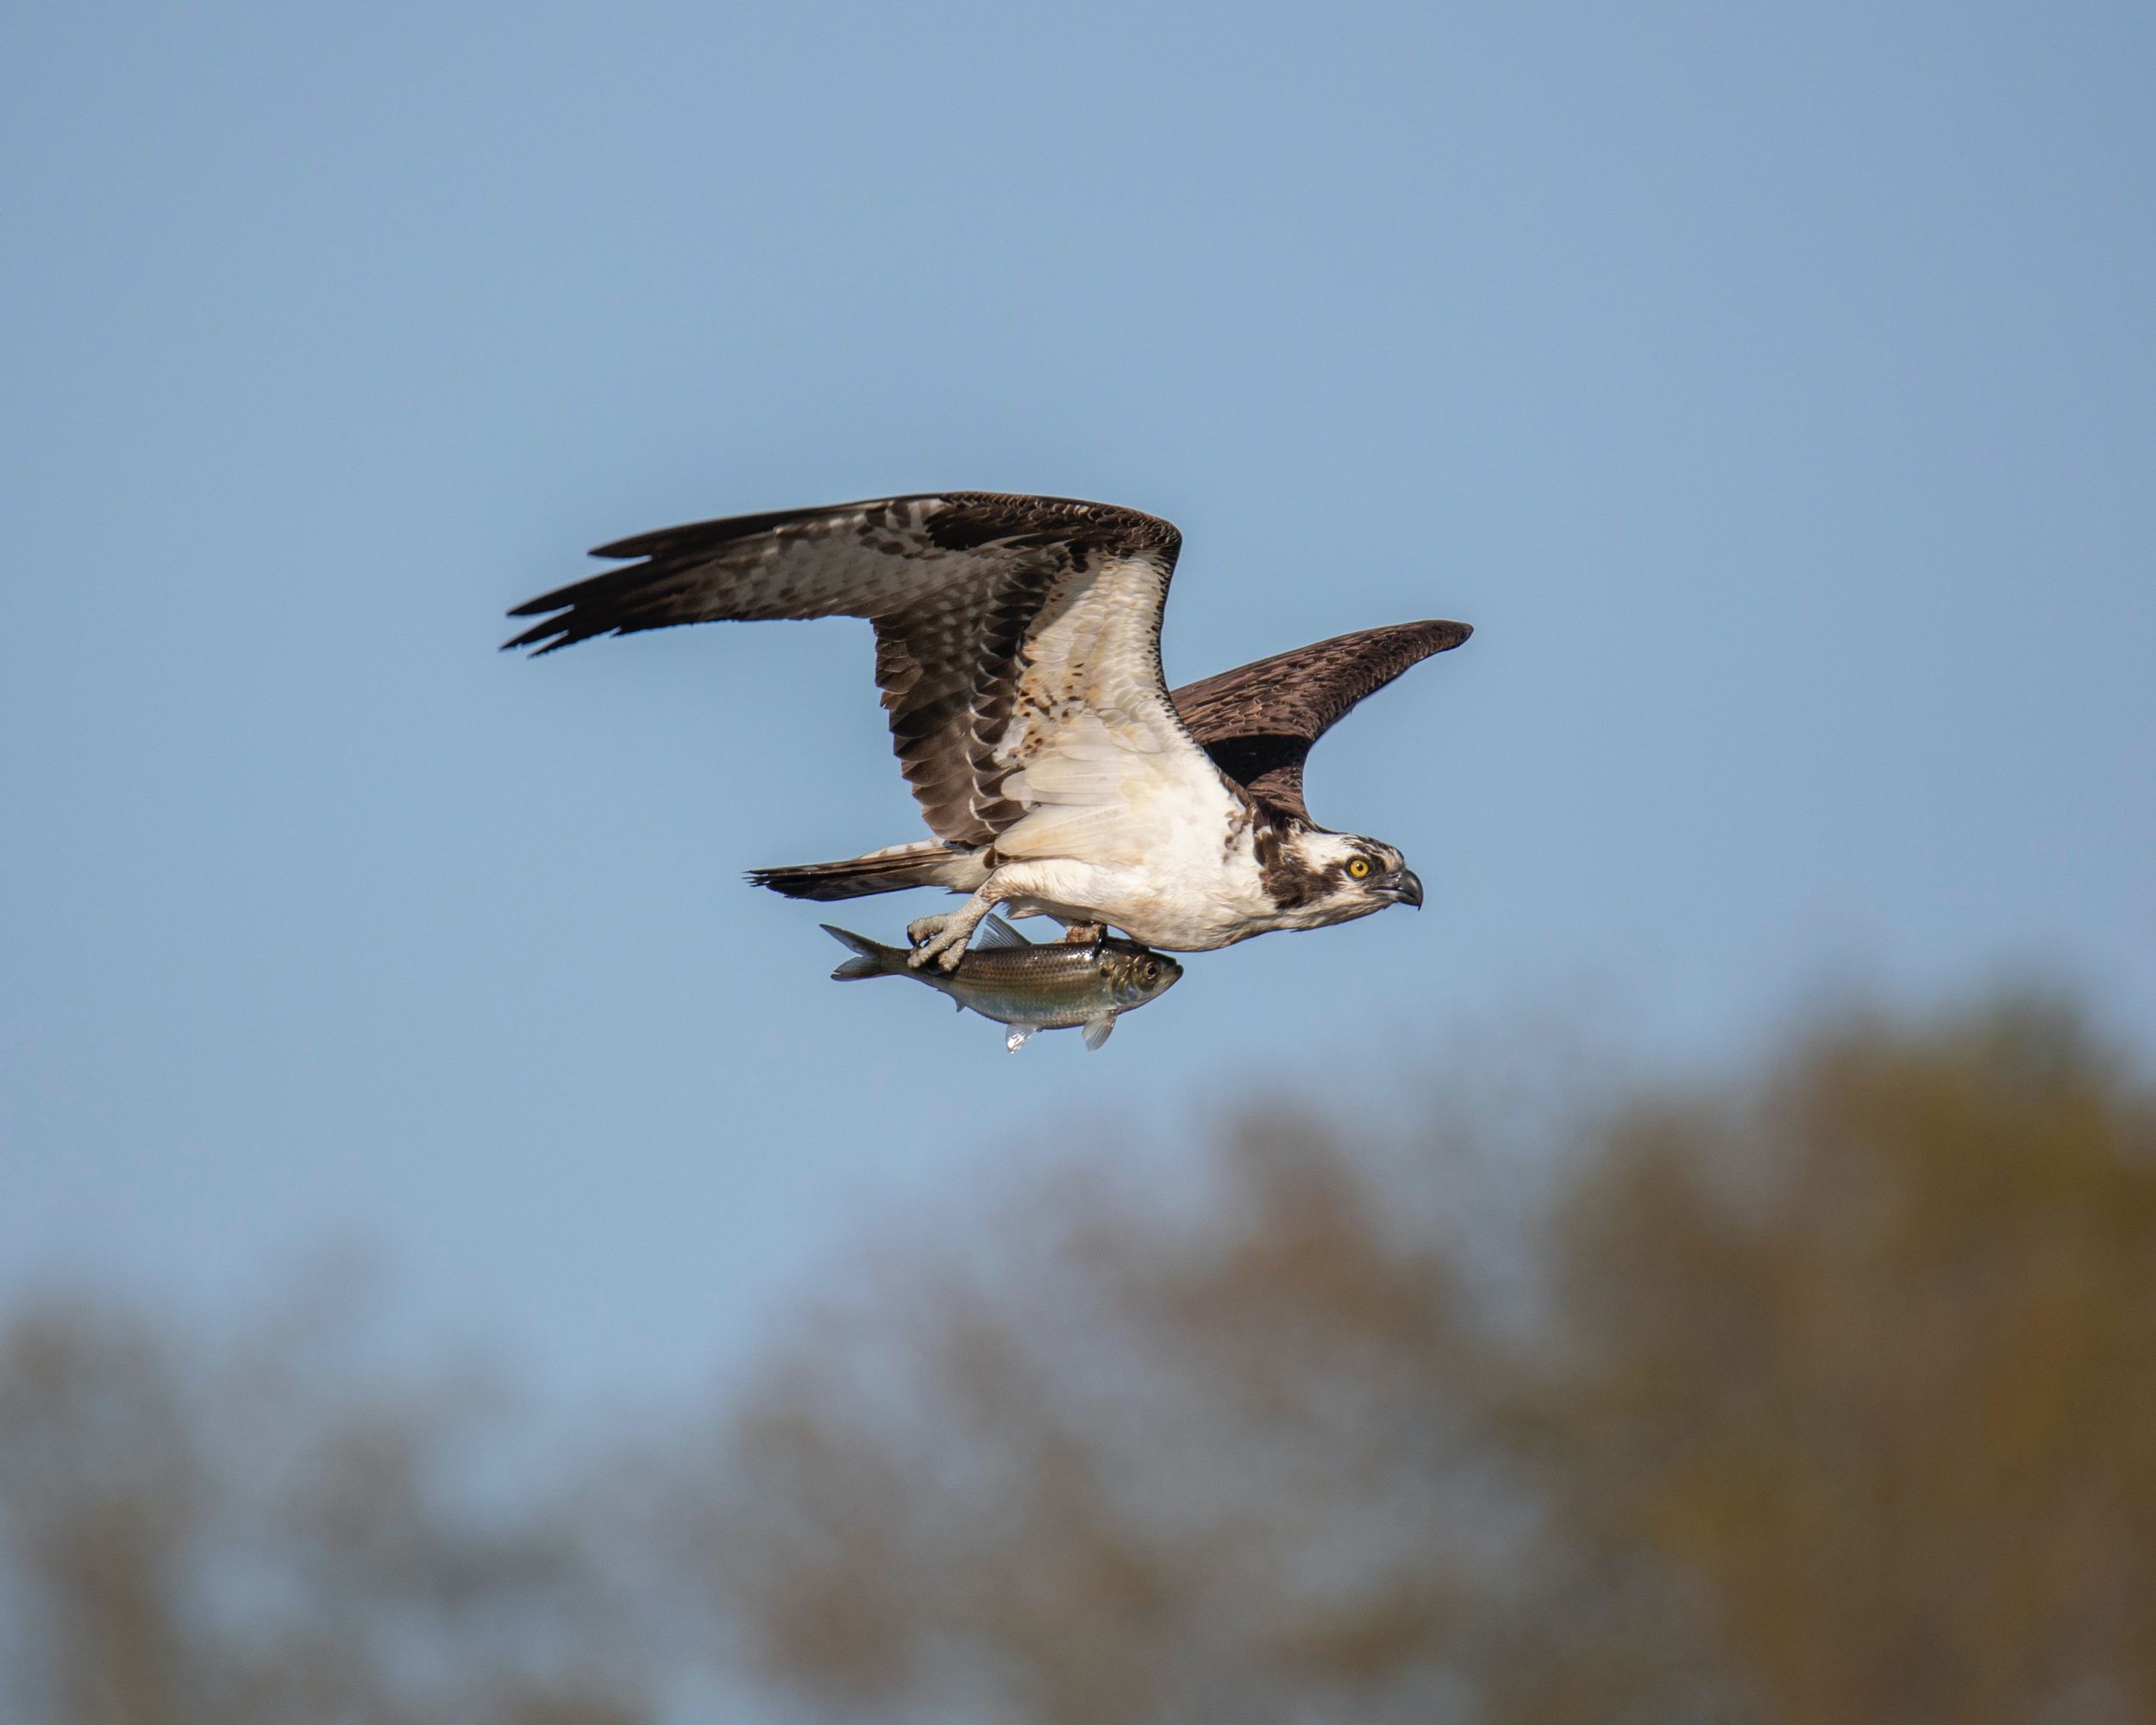 Osprey soars with a fish in its talons